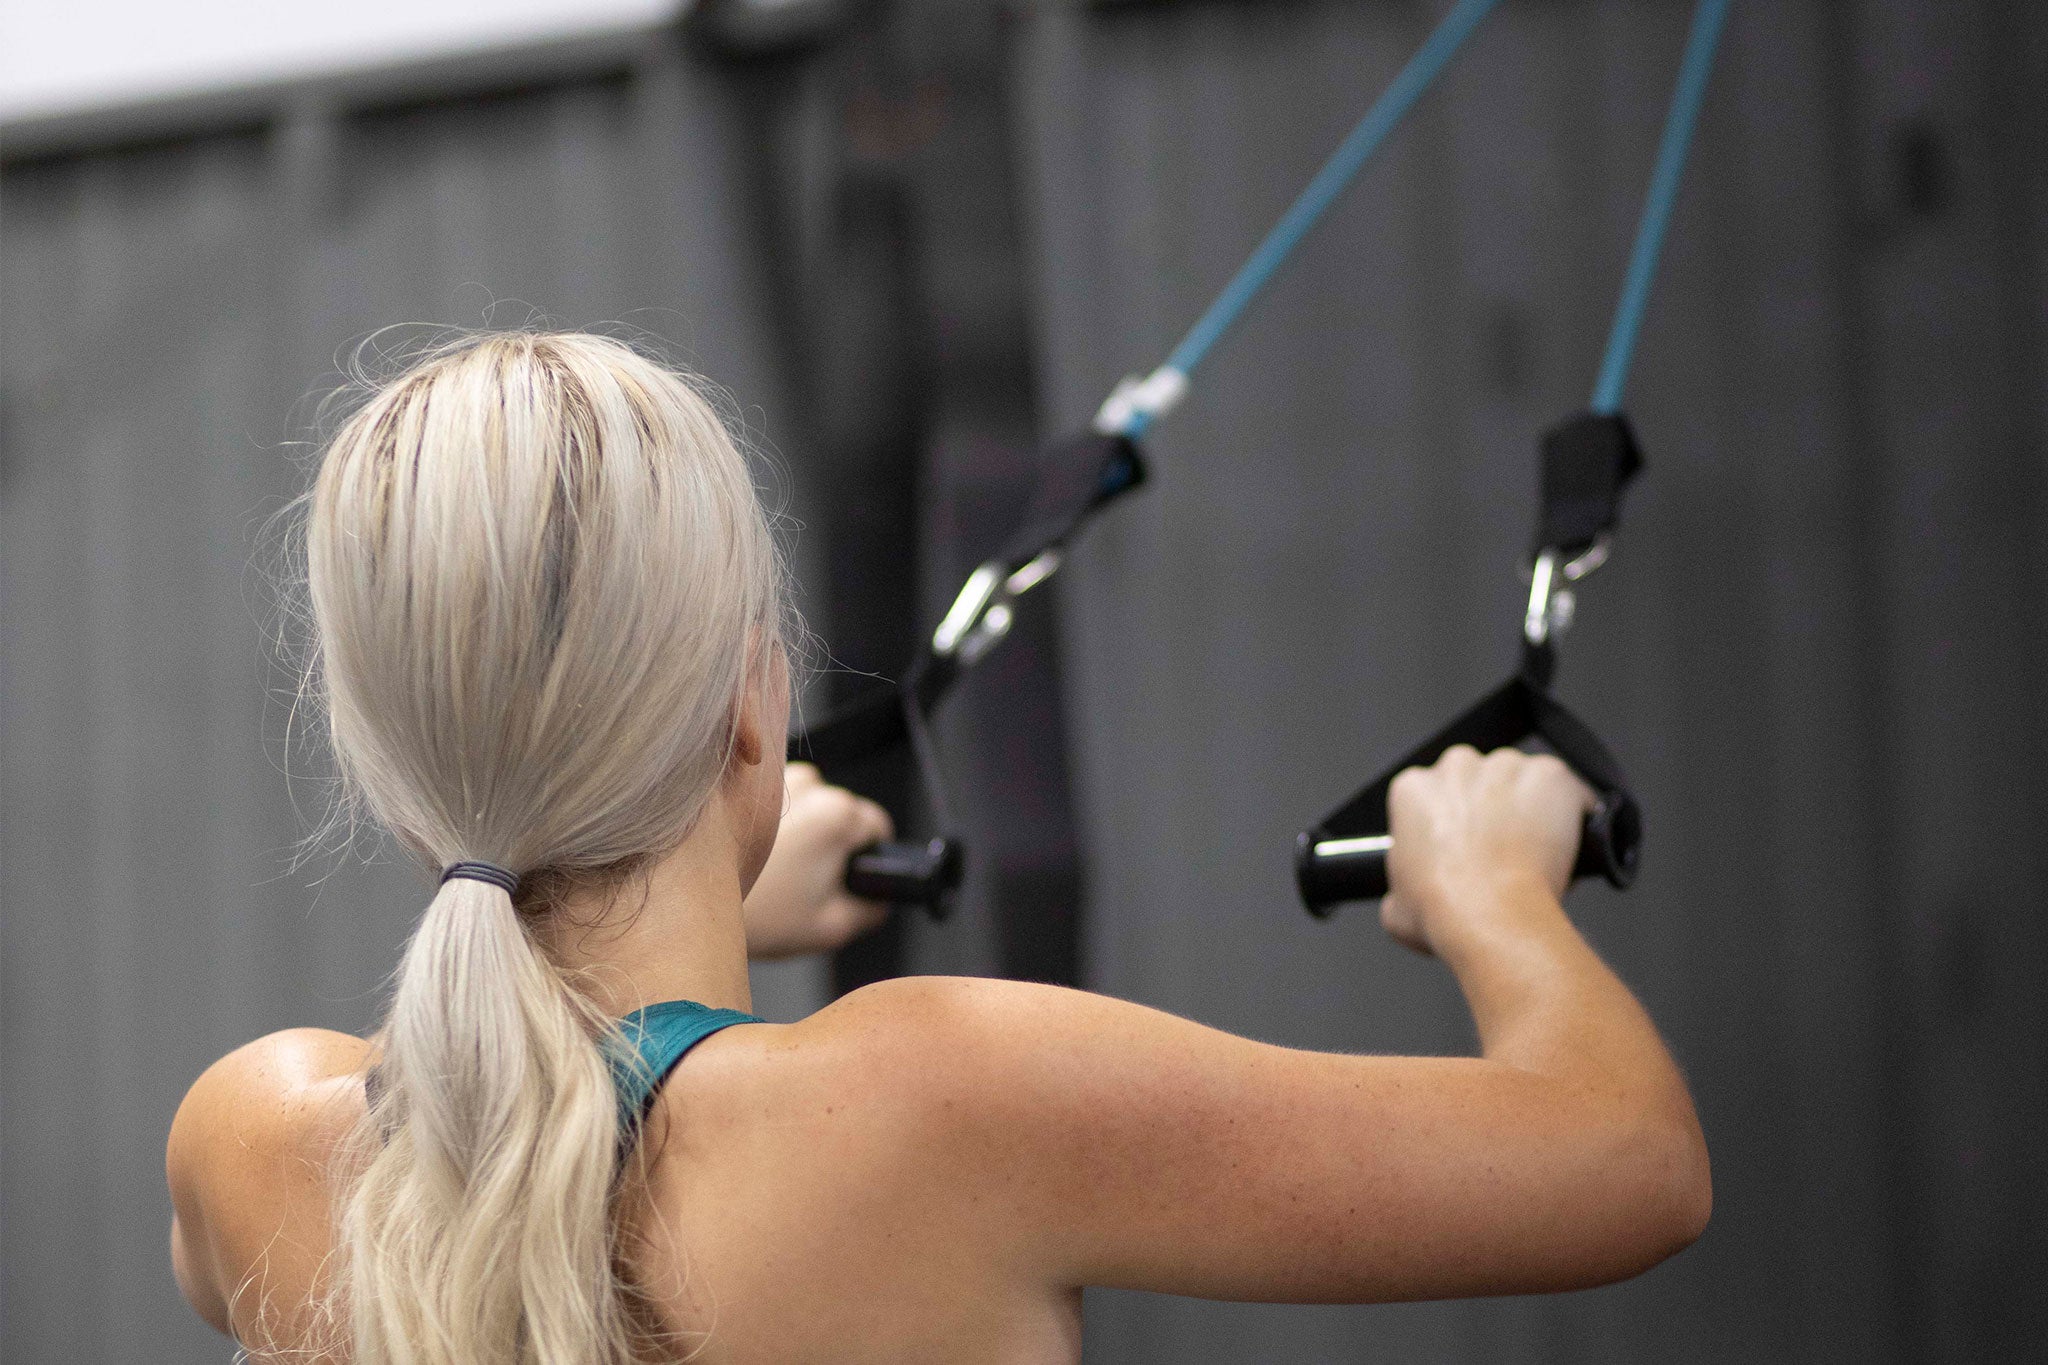 woman pulling blue resistance band